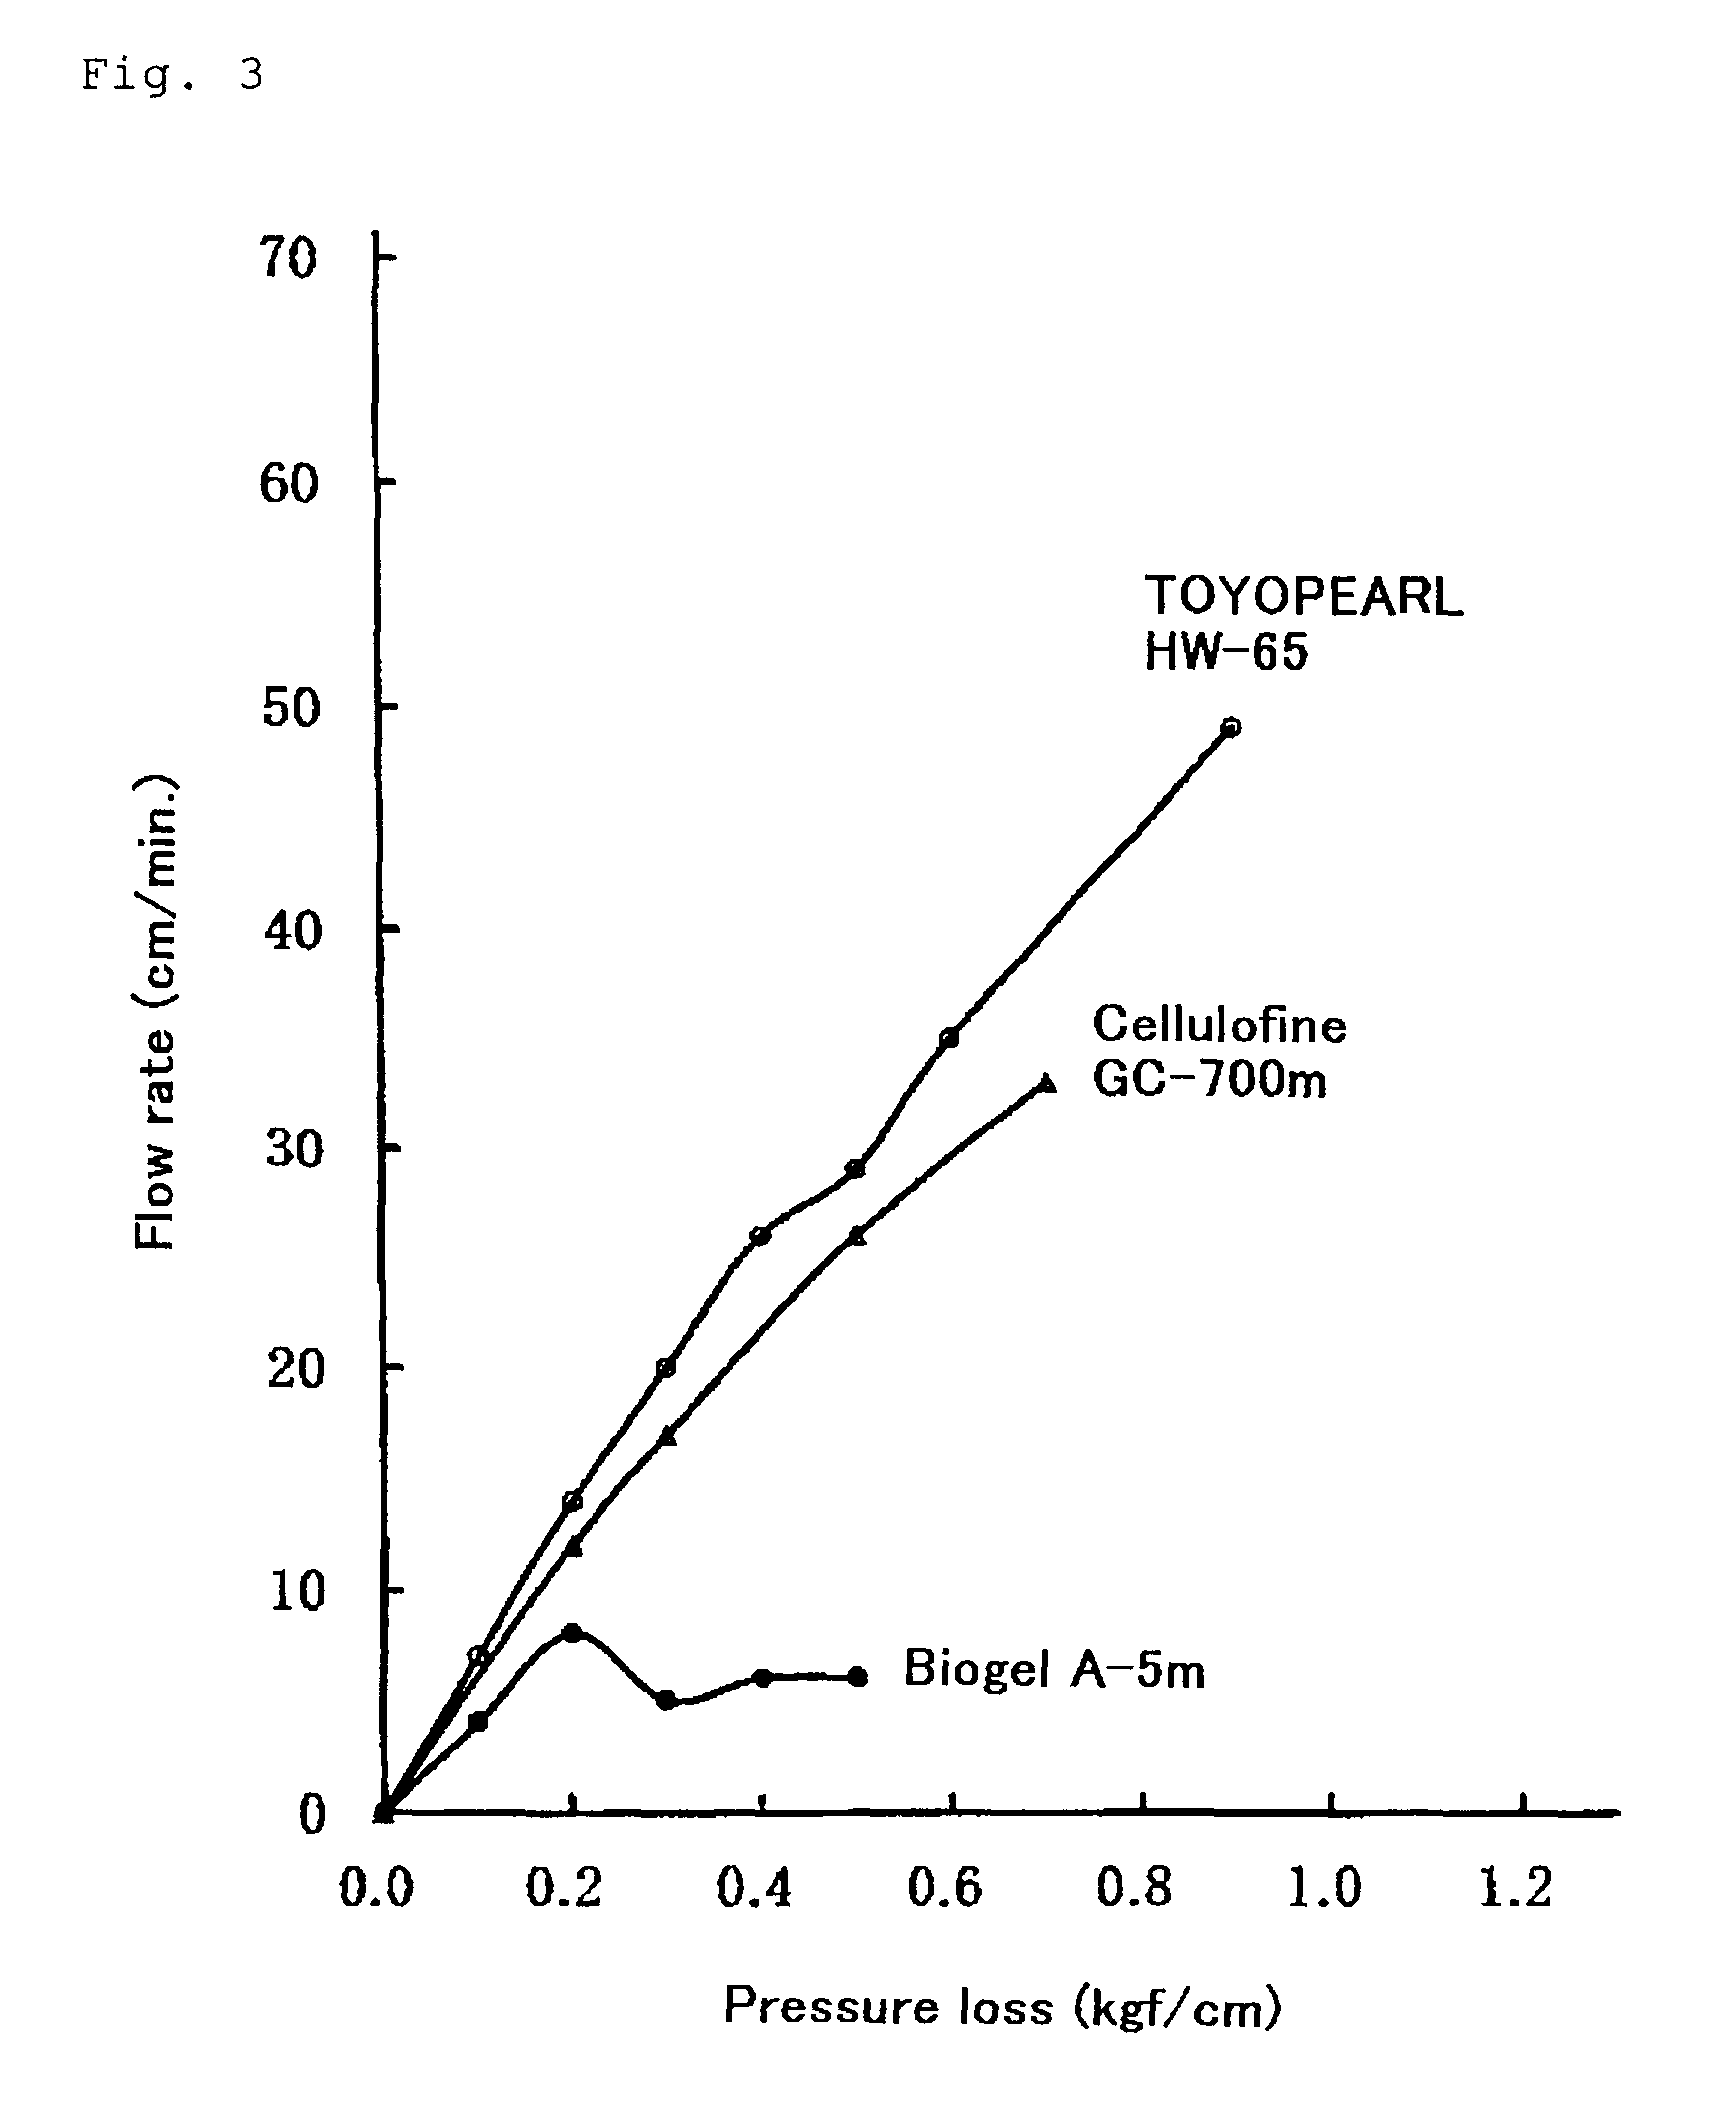 Direct hemoperfusion adsorber packed with adsorbent having water insoluble microparticle removed therefrom, and method of obtaining direct hemoperfusion adsorbent having water insoluble microparticle removed therefrom